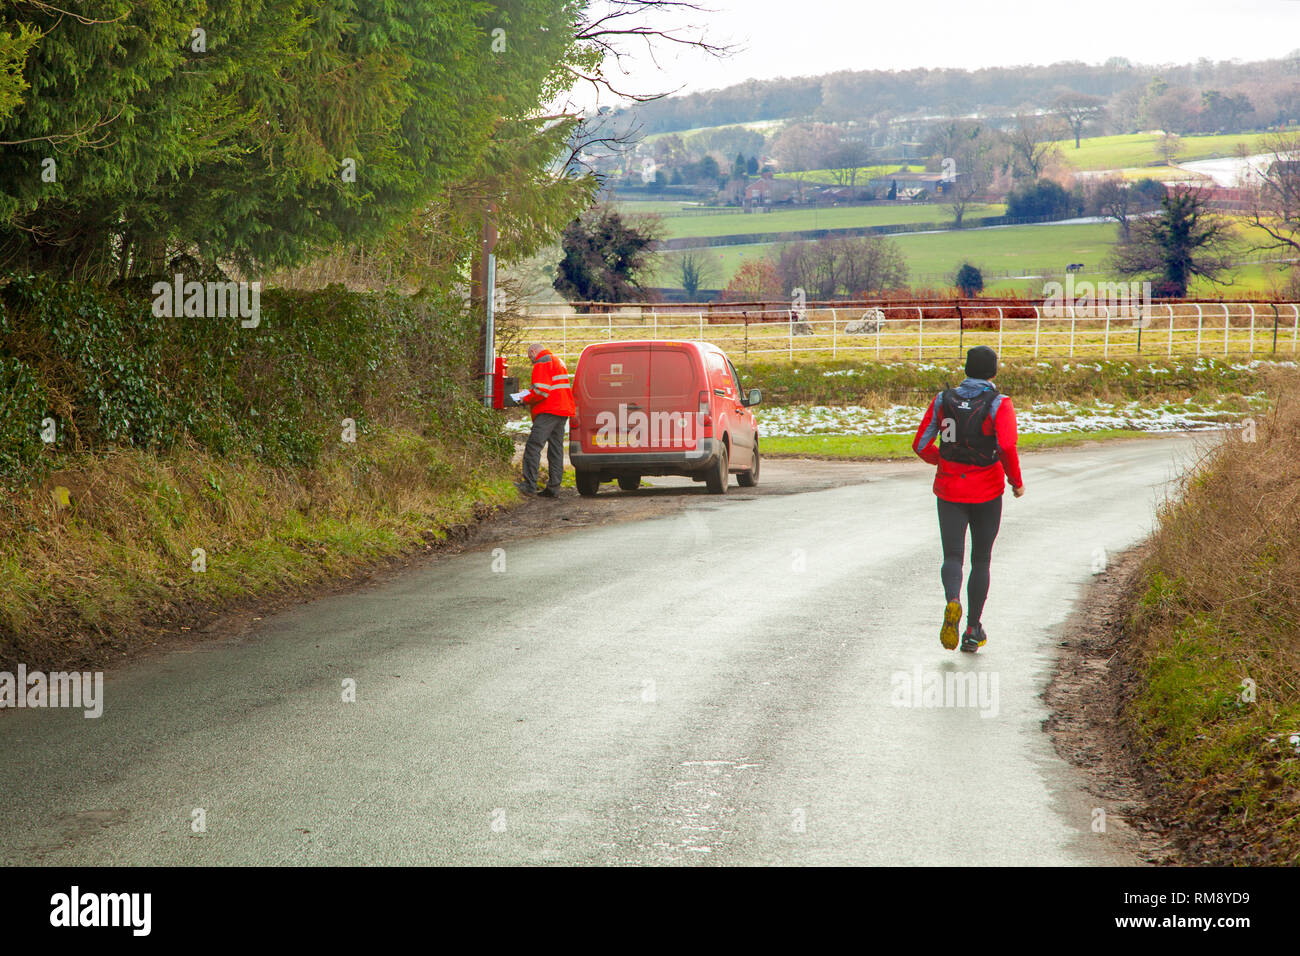 Postman wearing  high vis jacket in post van making a Rural letter collection from a post box in Cheshire countryside with a jogger running past Stock Photo